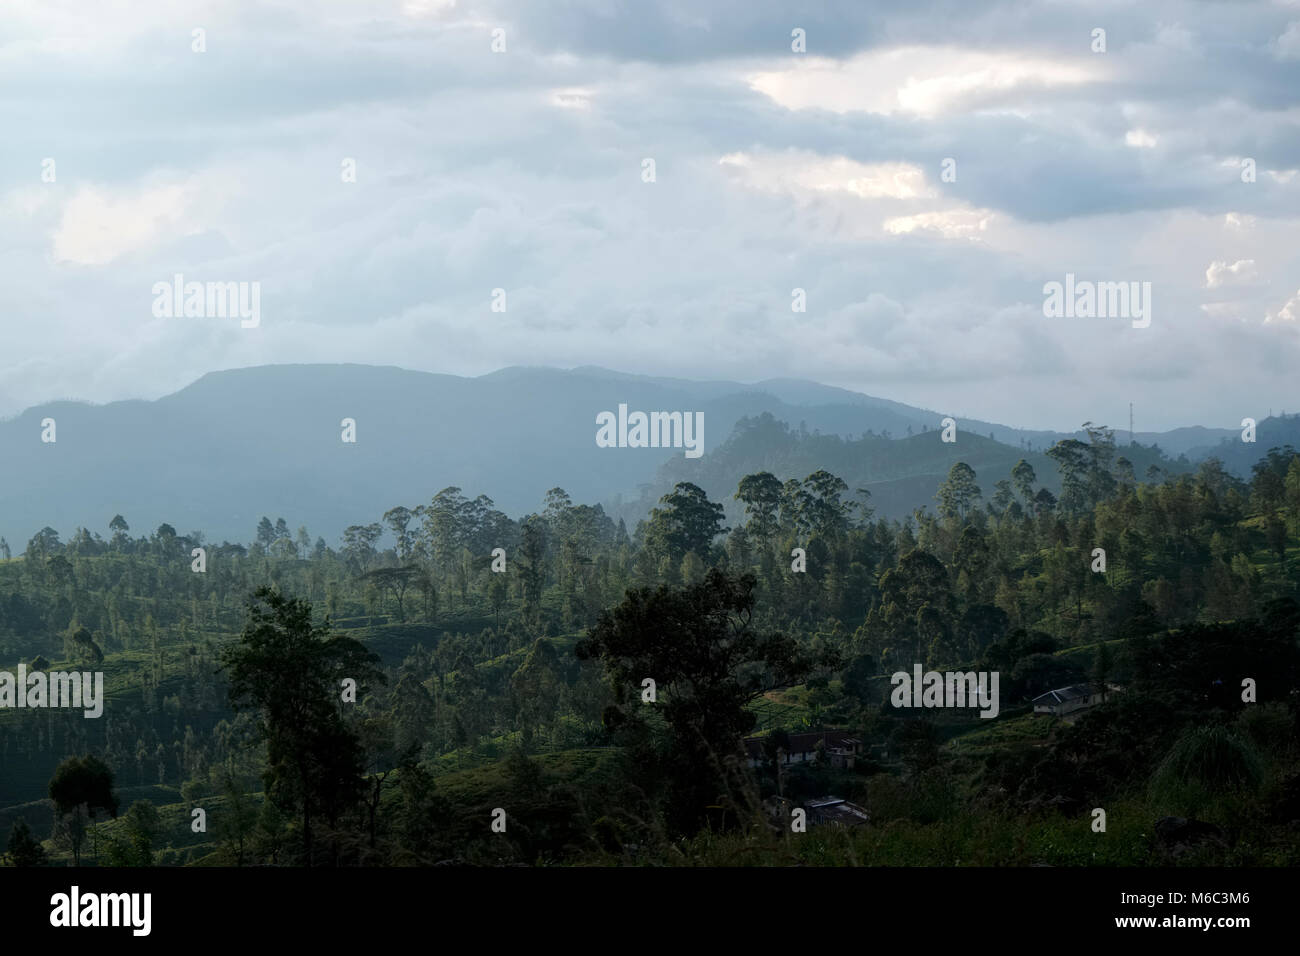 General view of woodland and countryside in the highlands near Ella in Sri Lanka Stock Photo